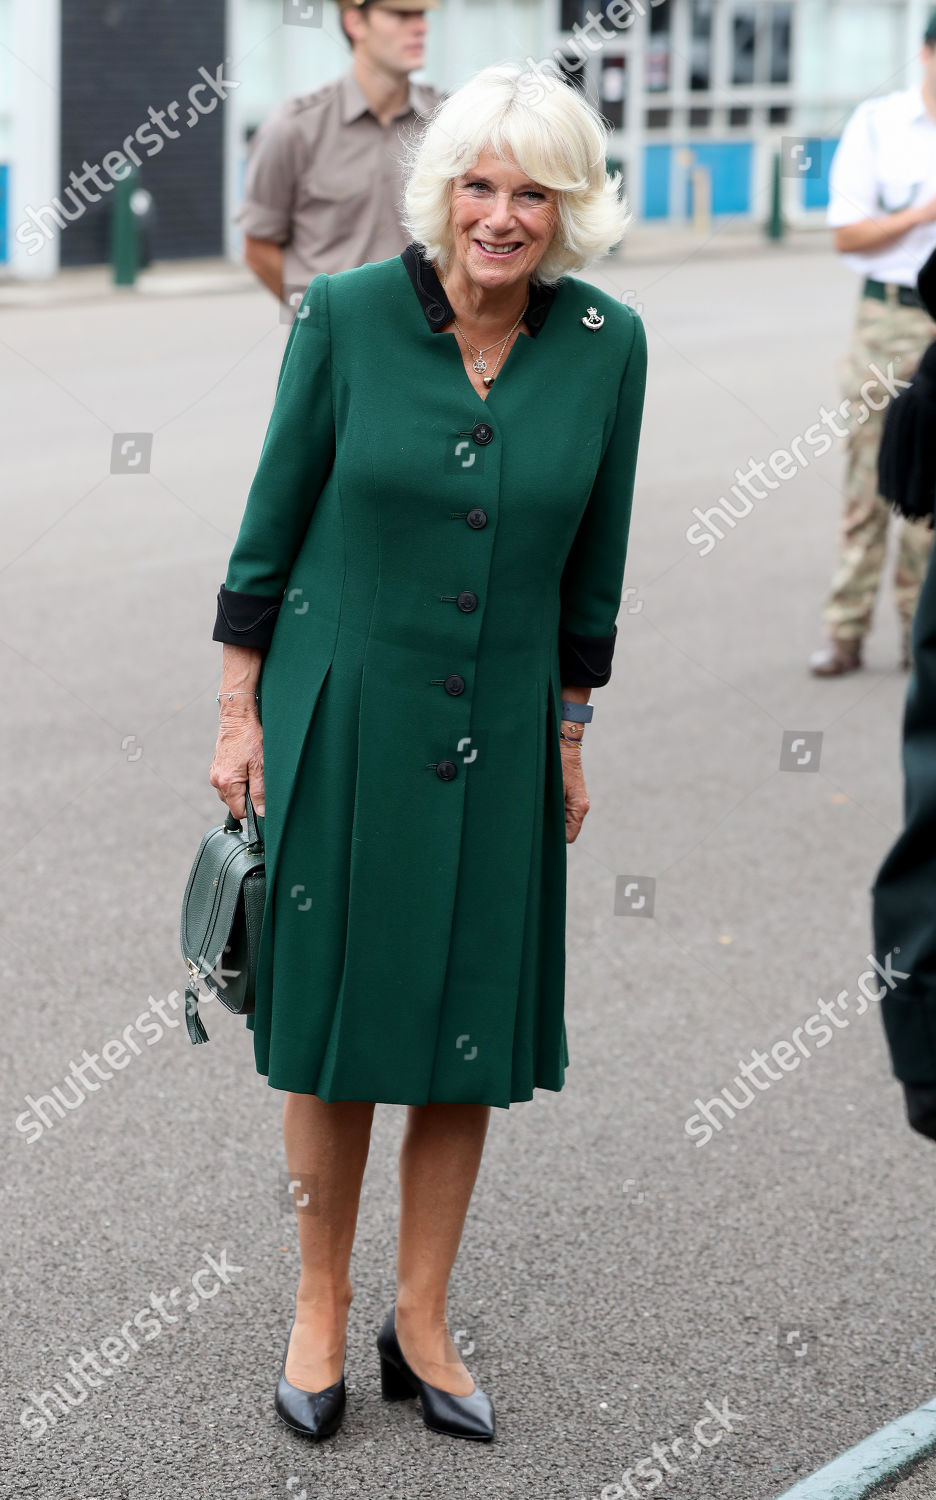 CASA REAL BRITÁNICA - Página 87 The-duchess-of-cornwall-visits-1st-battalion-the-rifles-beachley-barracks-chepstow-wales-shutterstock-editorial-10768638g